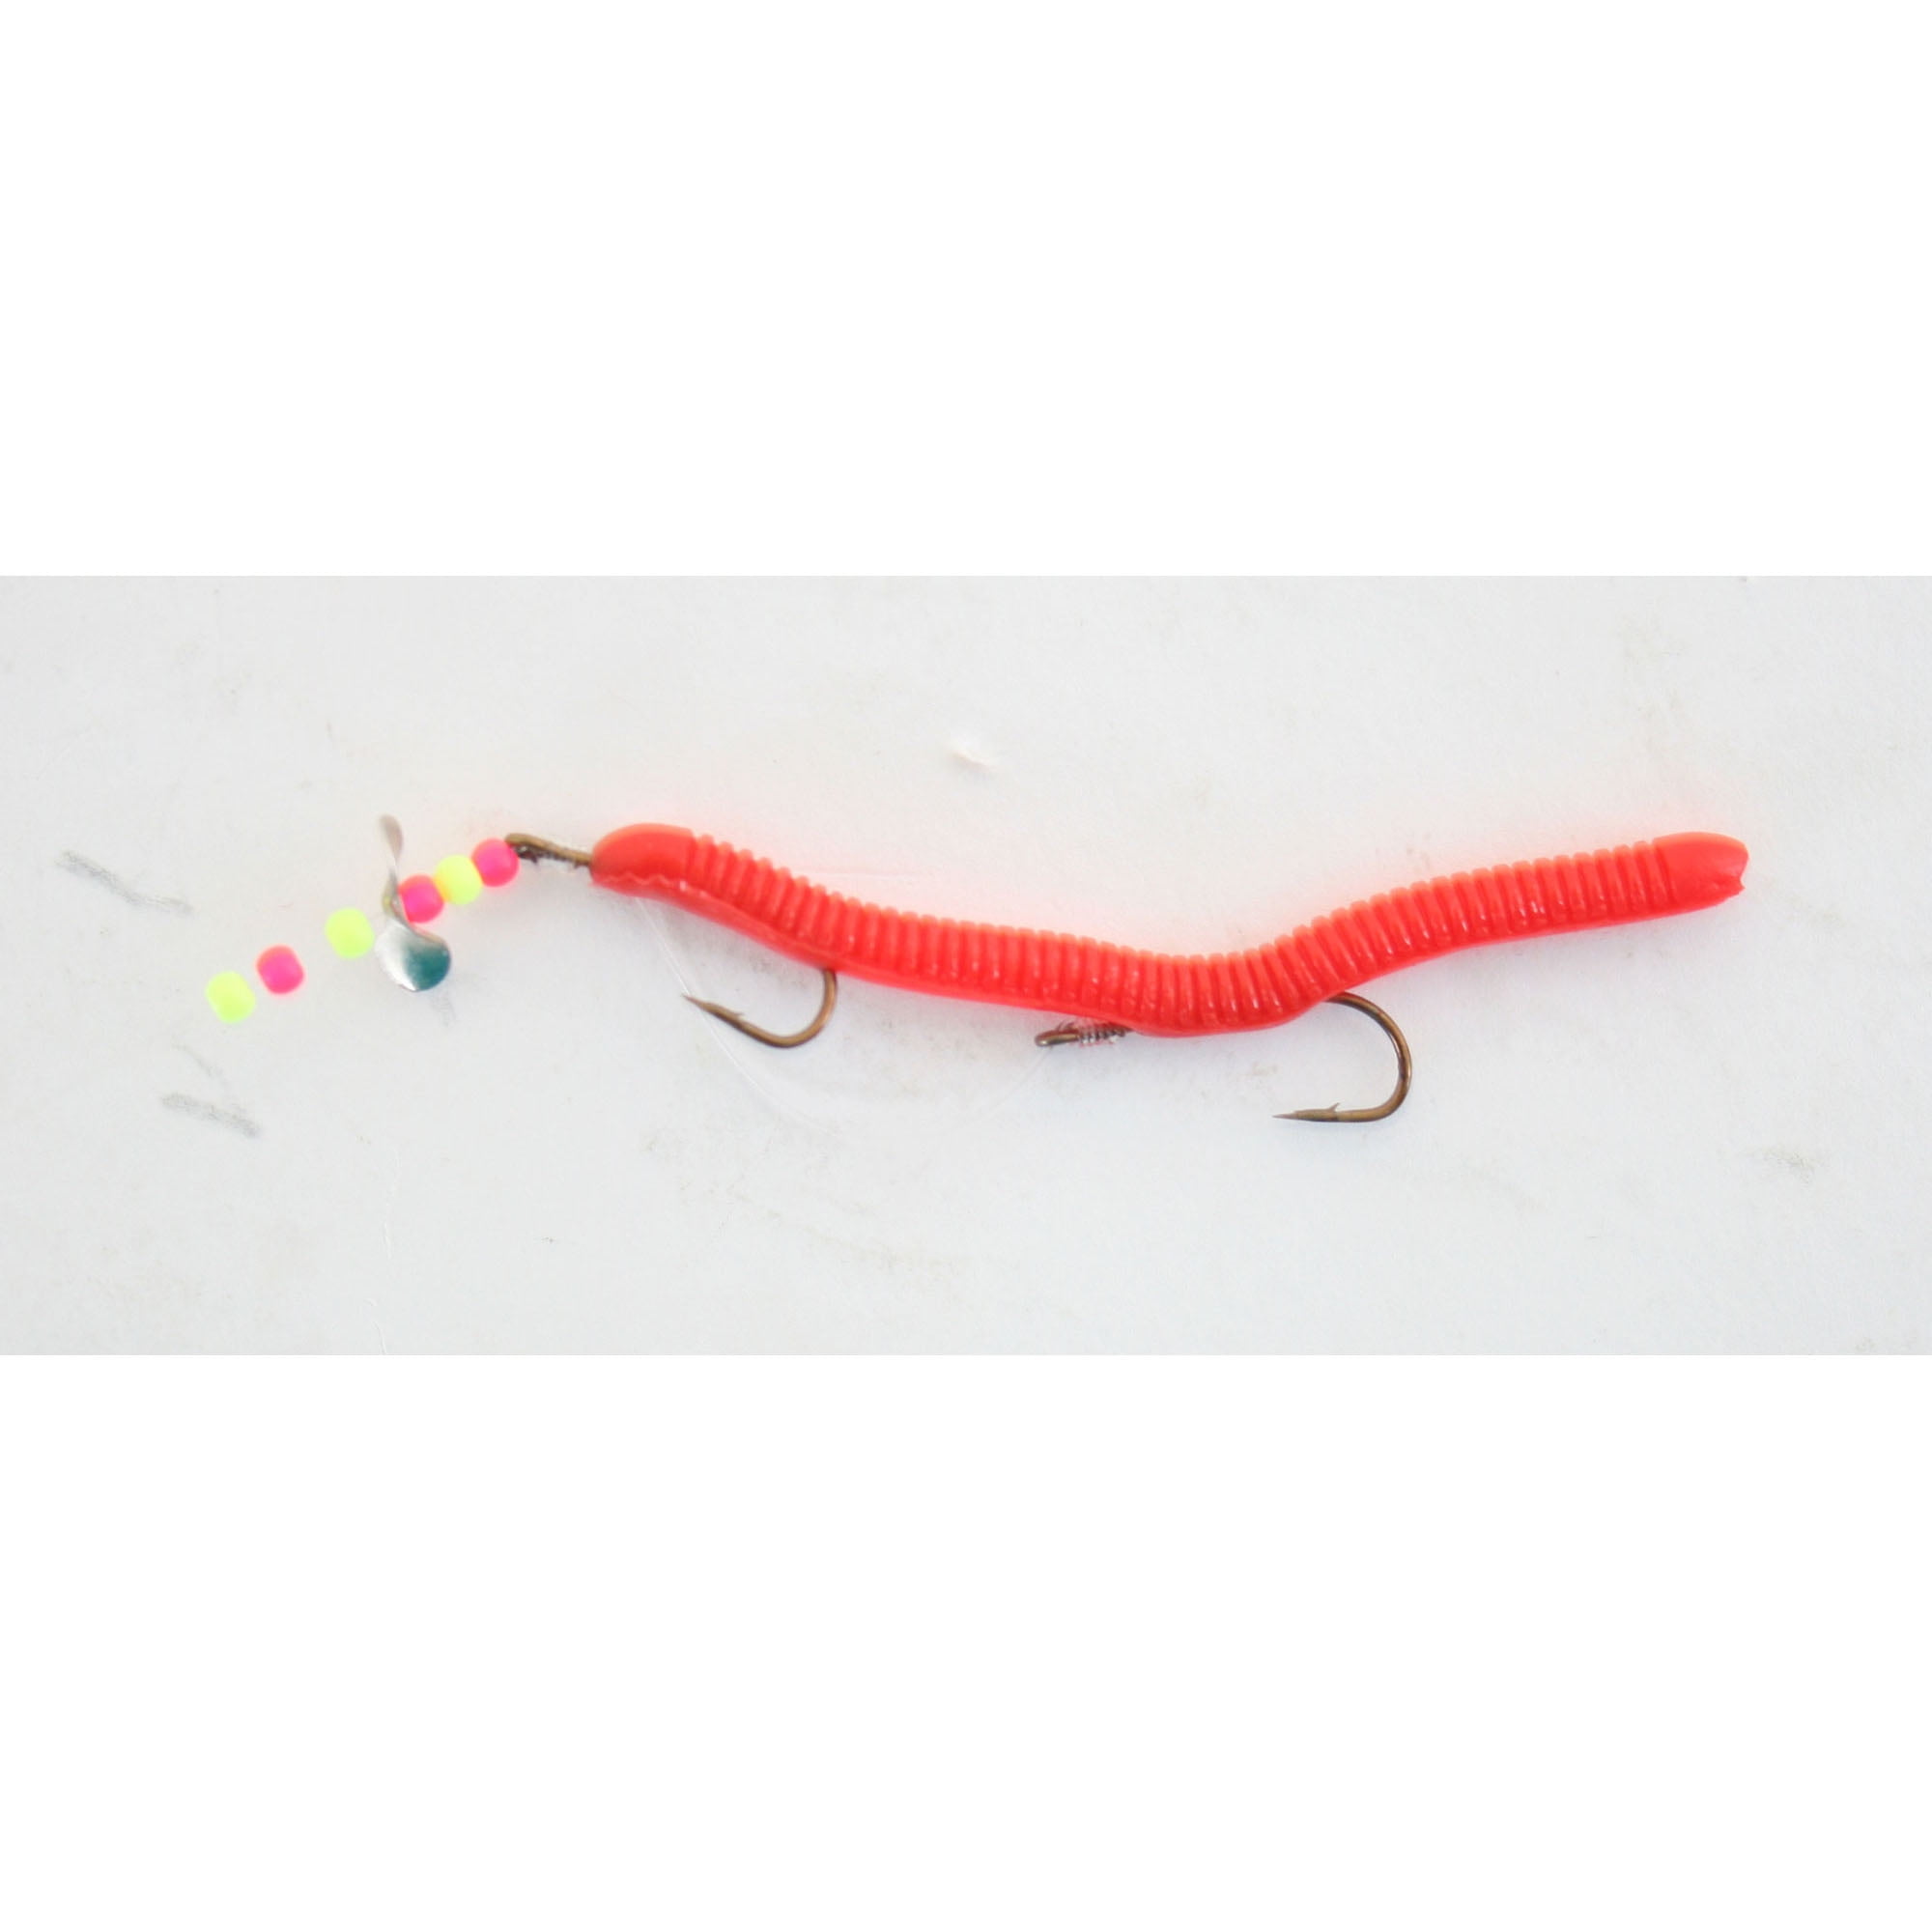 Creme 802-1 Angle Fly Rod Worm Red 2.25 Fishing Sinkbait Freshwater Lure 